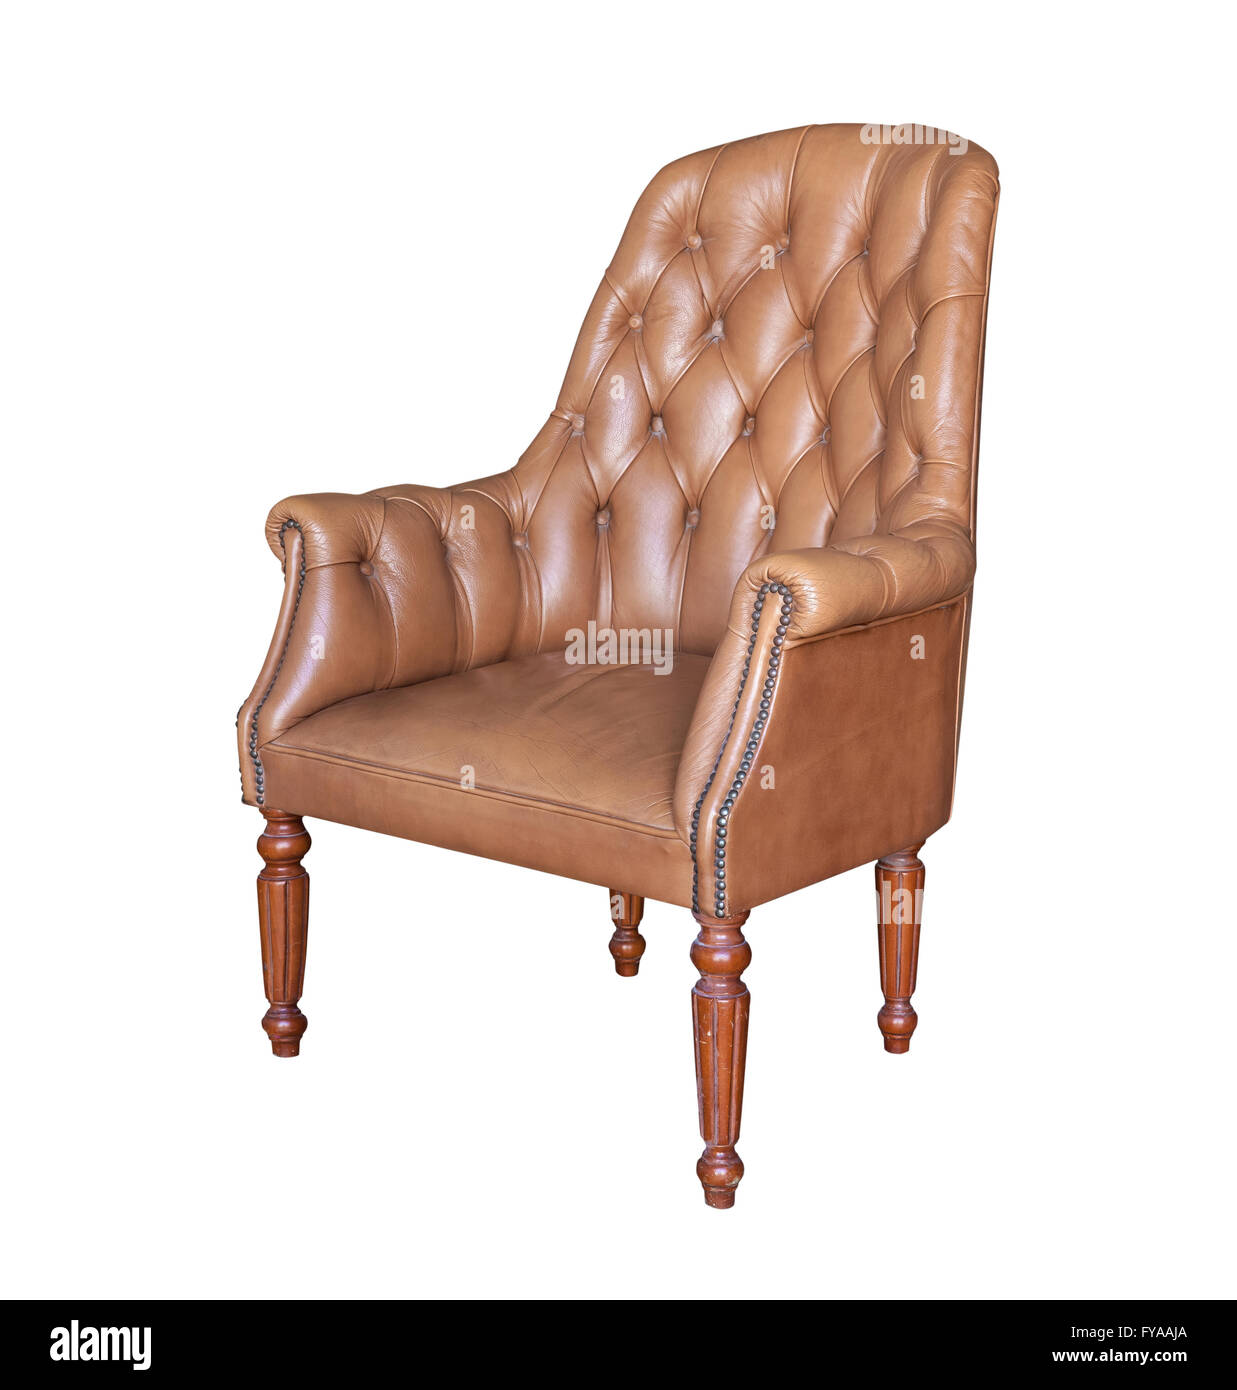 Vintage brown leather armchair isolated Stock Photo